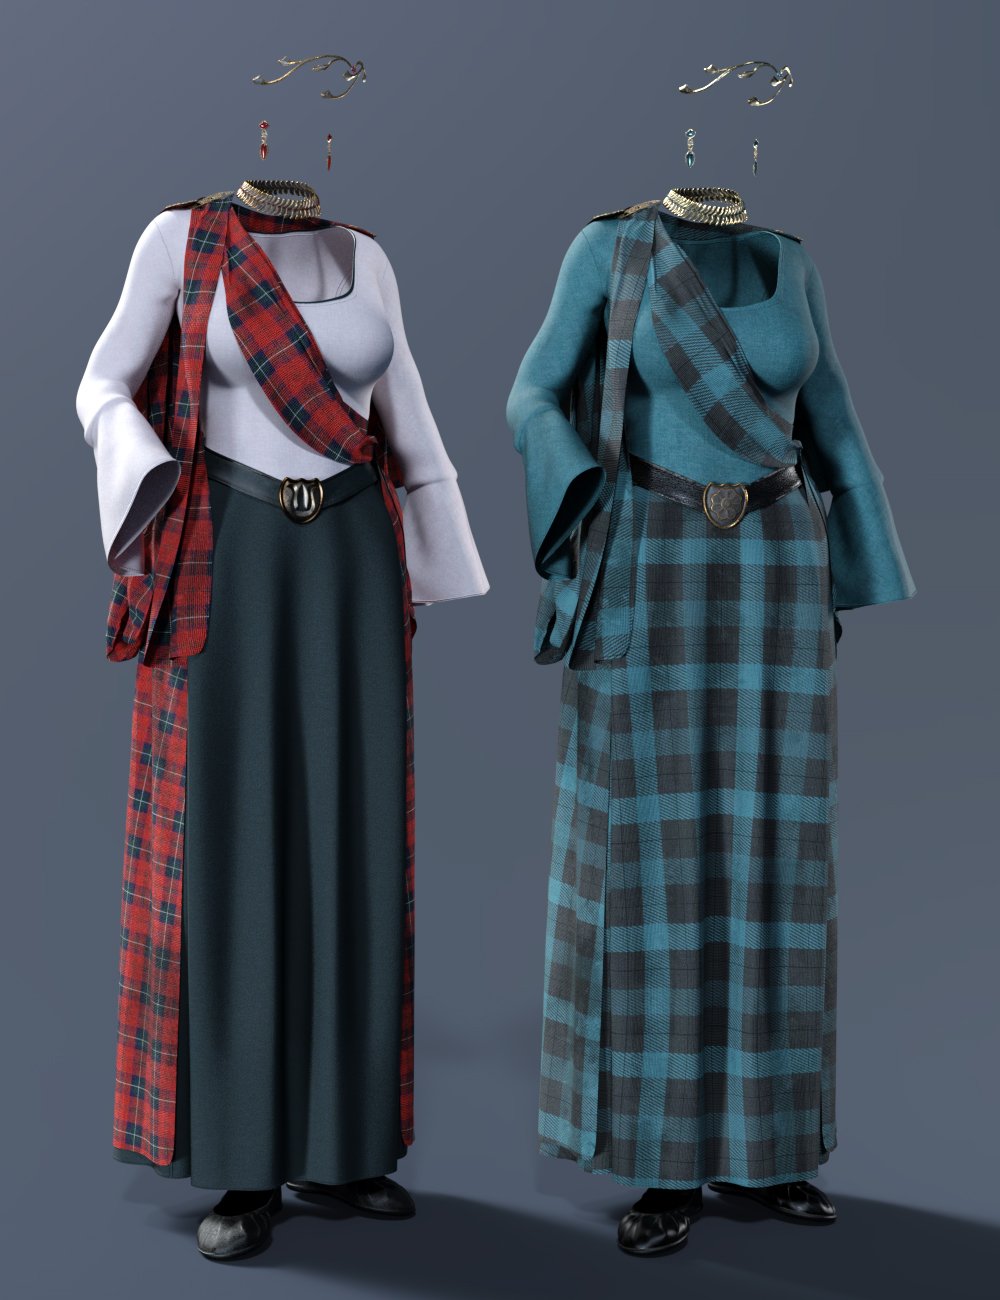 dForce Scottish Wear: Willow by: Moonscape GraphicsSade, 3D Models by Daz 3D